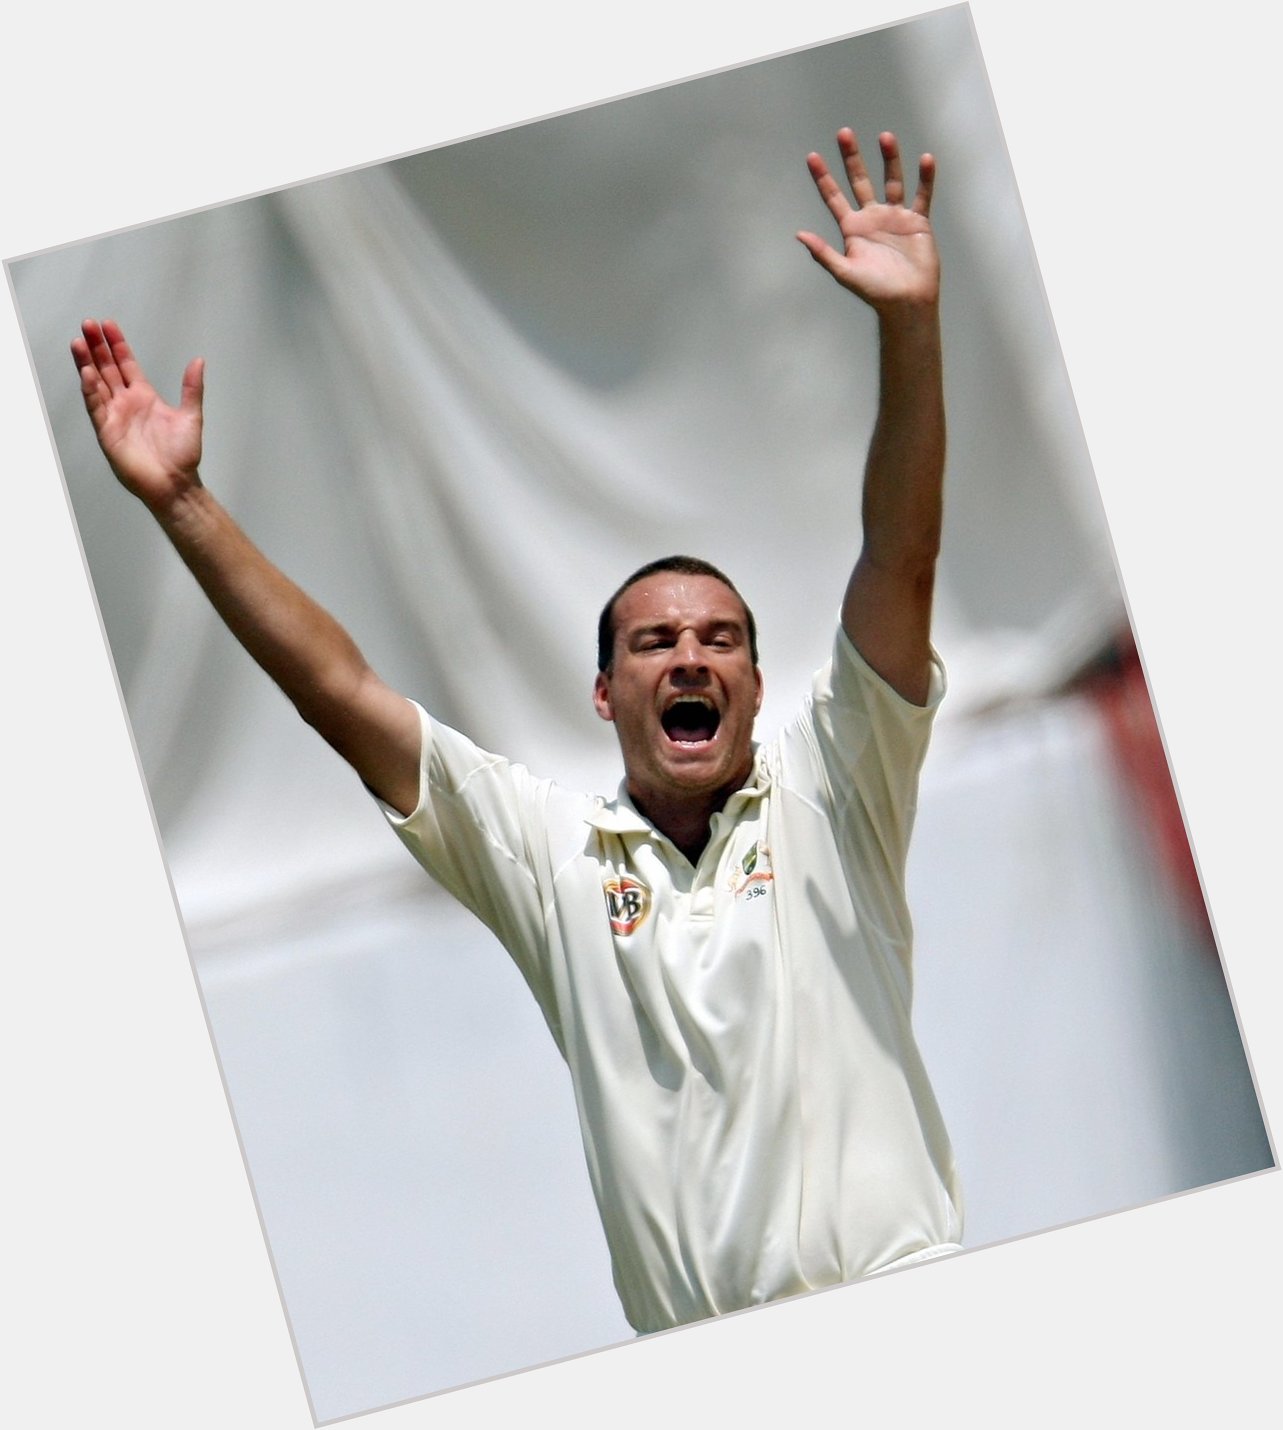 He took 94 wickets in 24 Tests for AUS at an average of 23.86 and best figures of 5/32 Happy Birthday Stuart Clark 